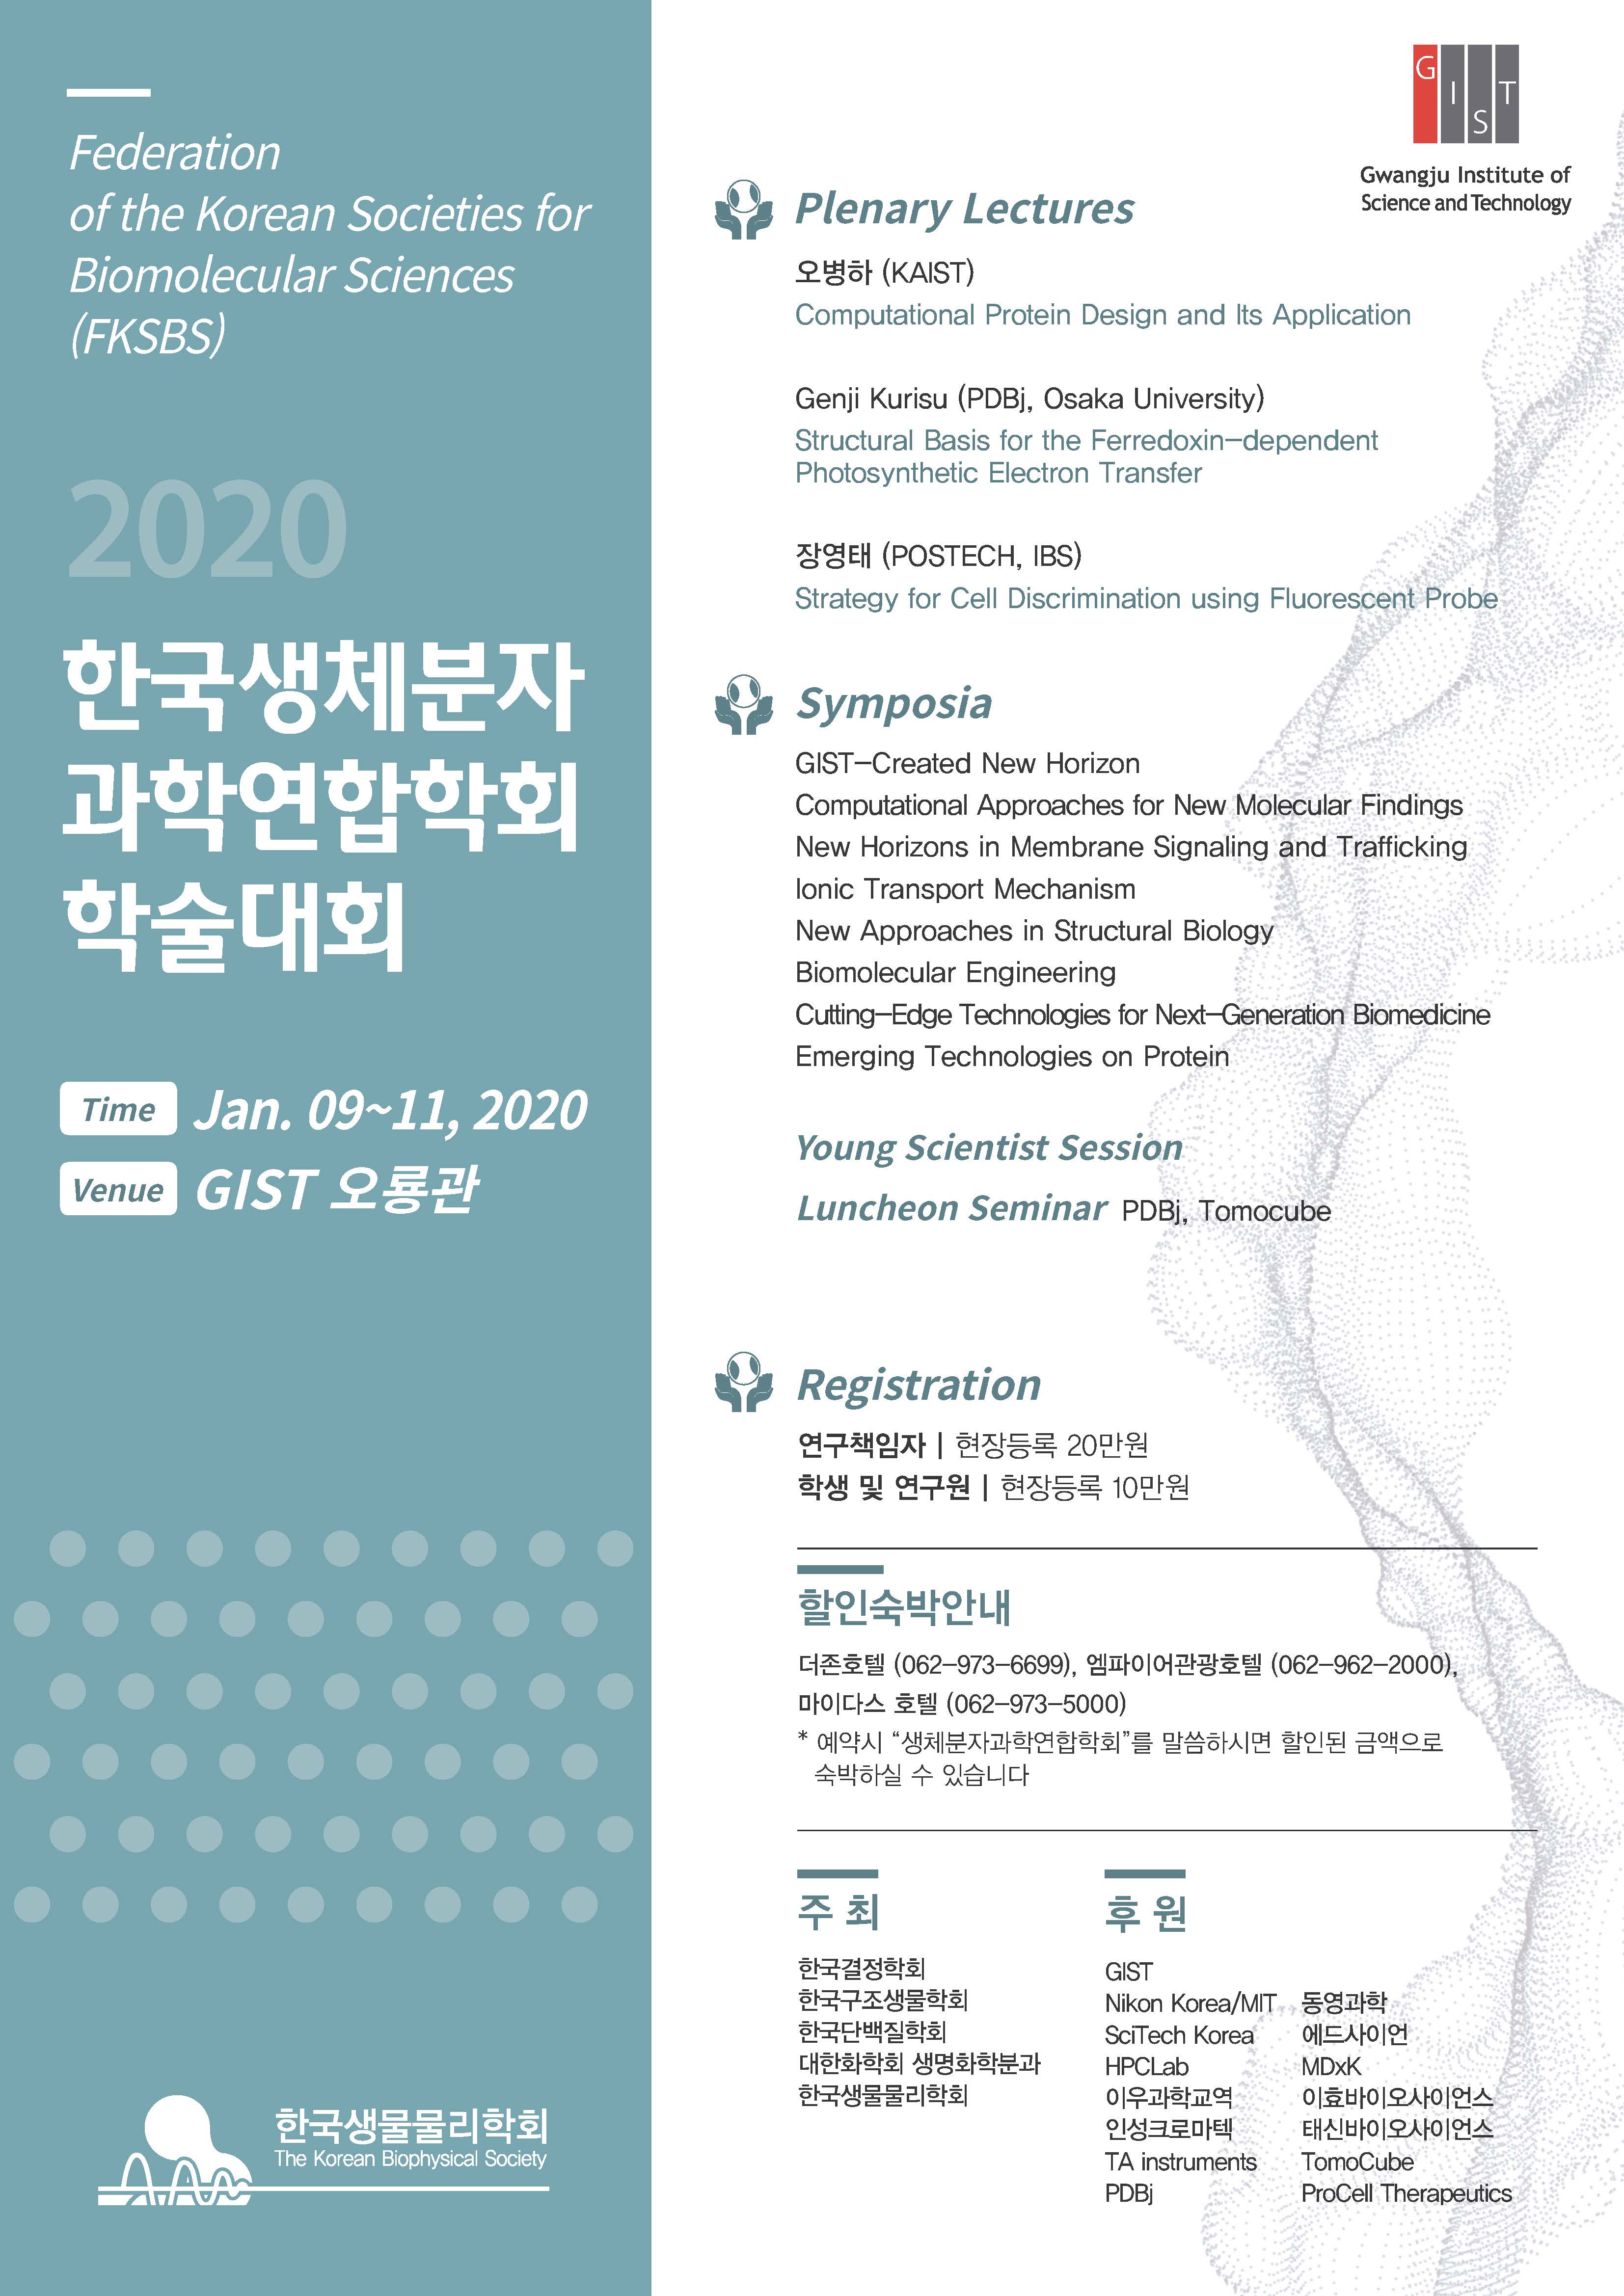 2020 Conference of the Federation of Korean Societies for Bimolecular Sciences 이미지